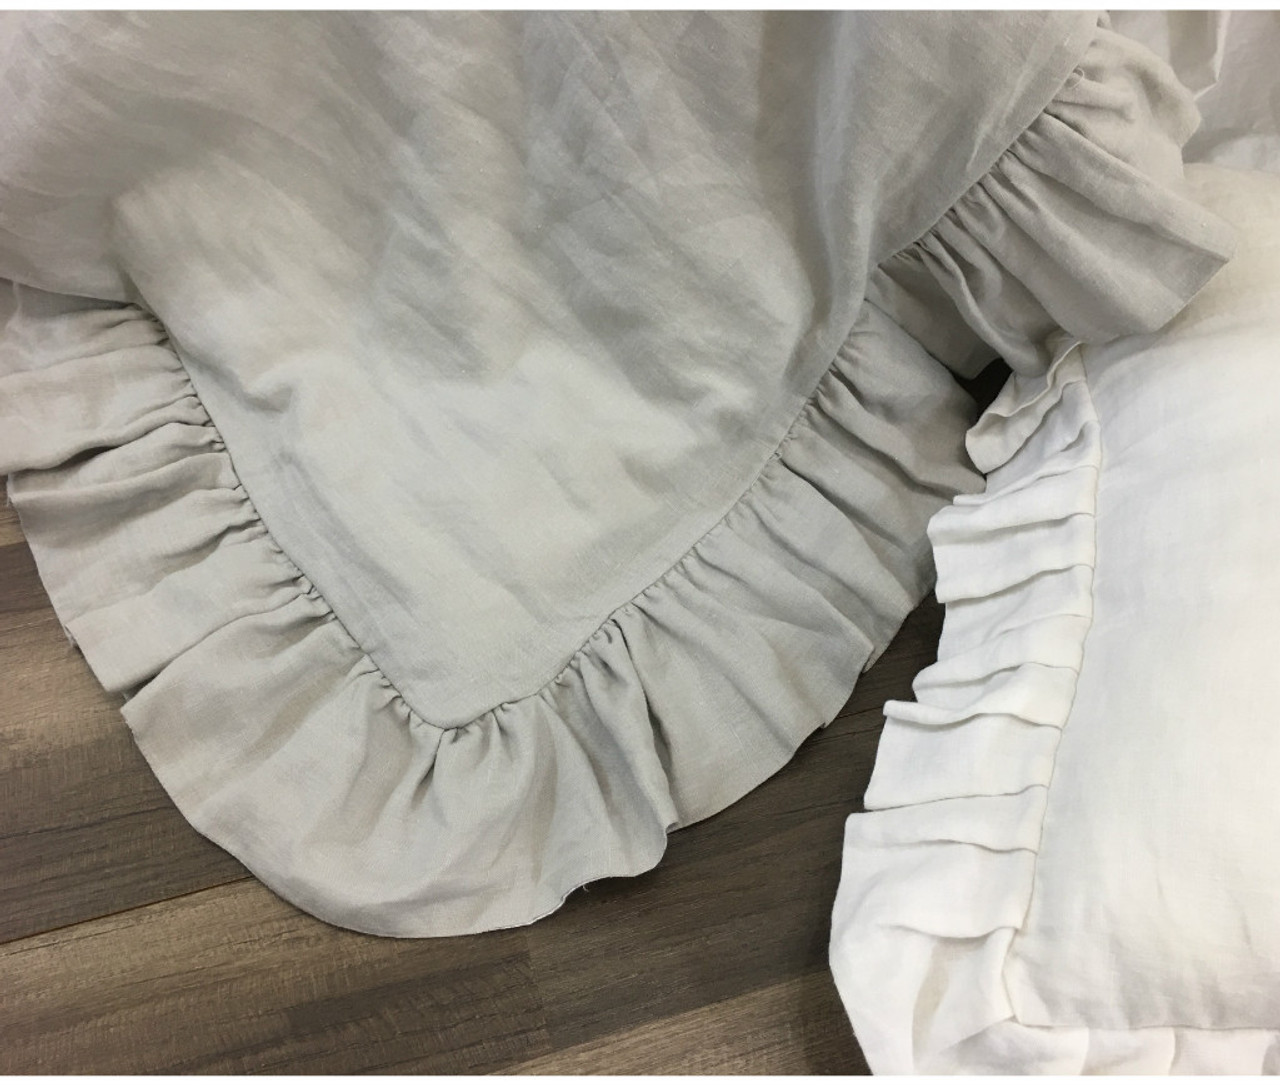 Stone Grey Linen Duvet Cover with Country Ruffle Hem, An exquisite Piece